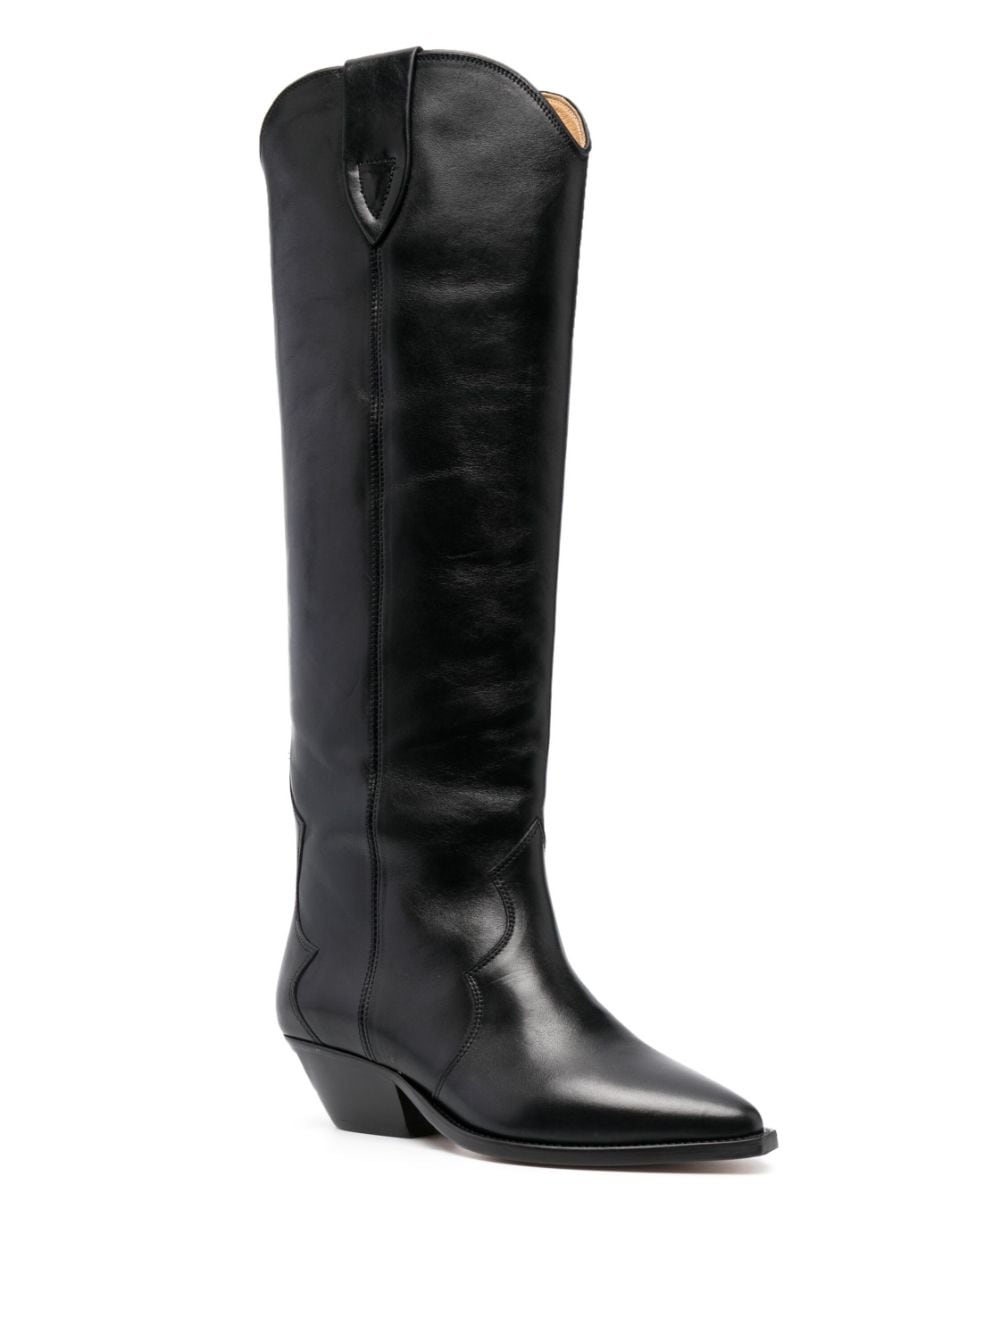 The Isabel Marant Denvee High Boots in Black Available at The New Trend Australia